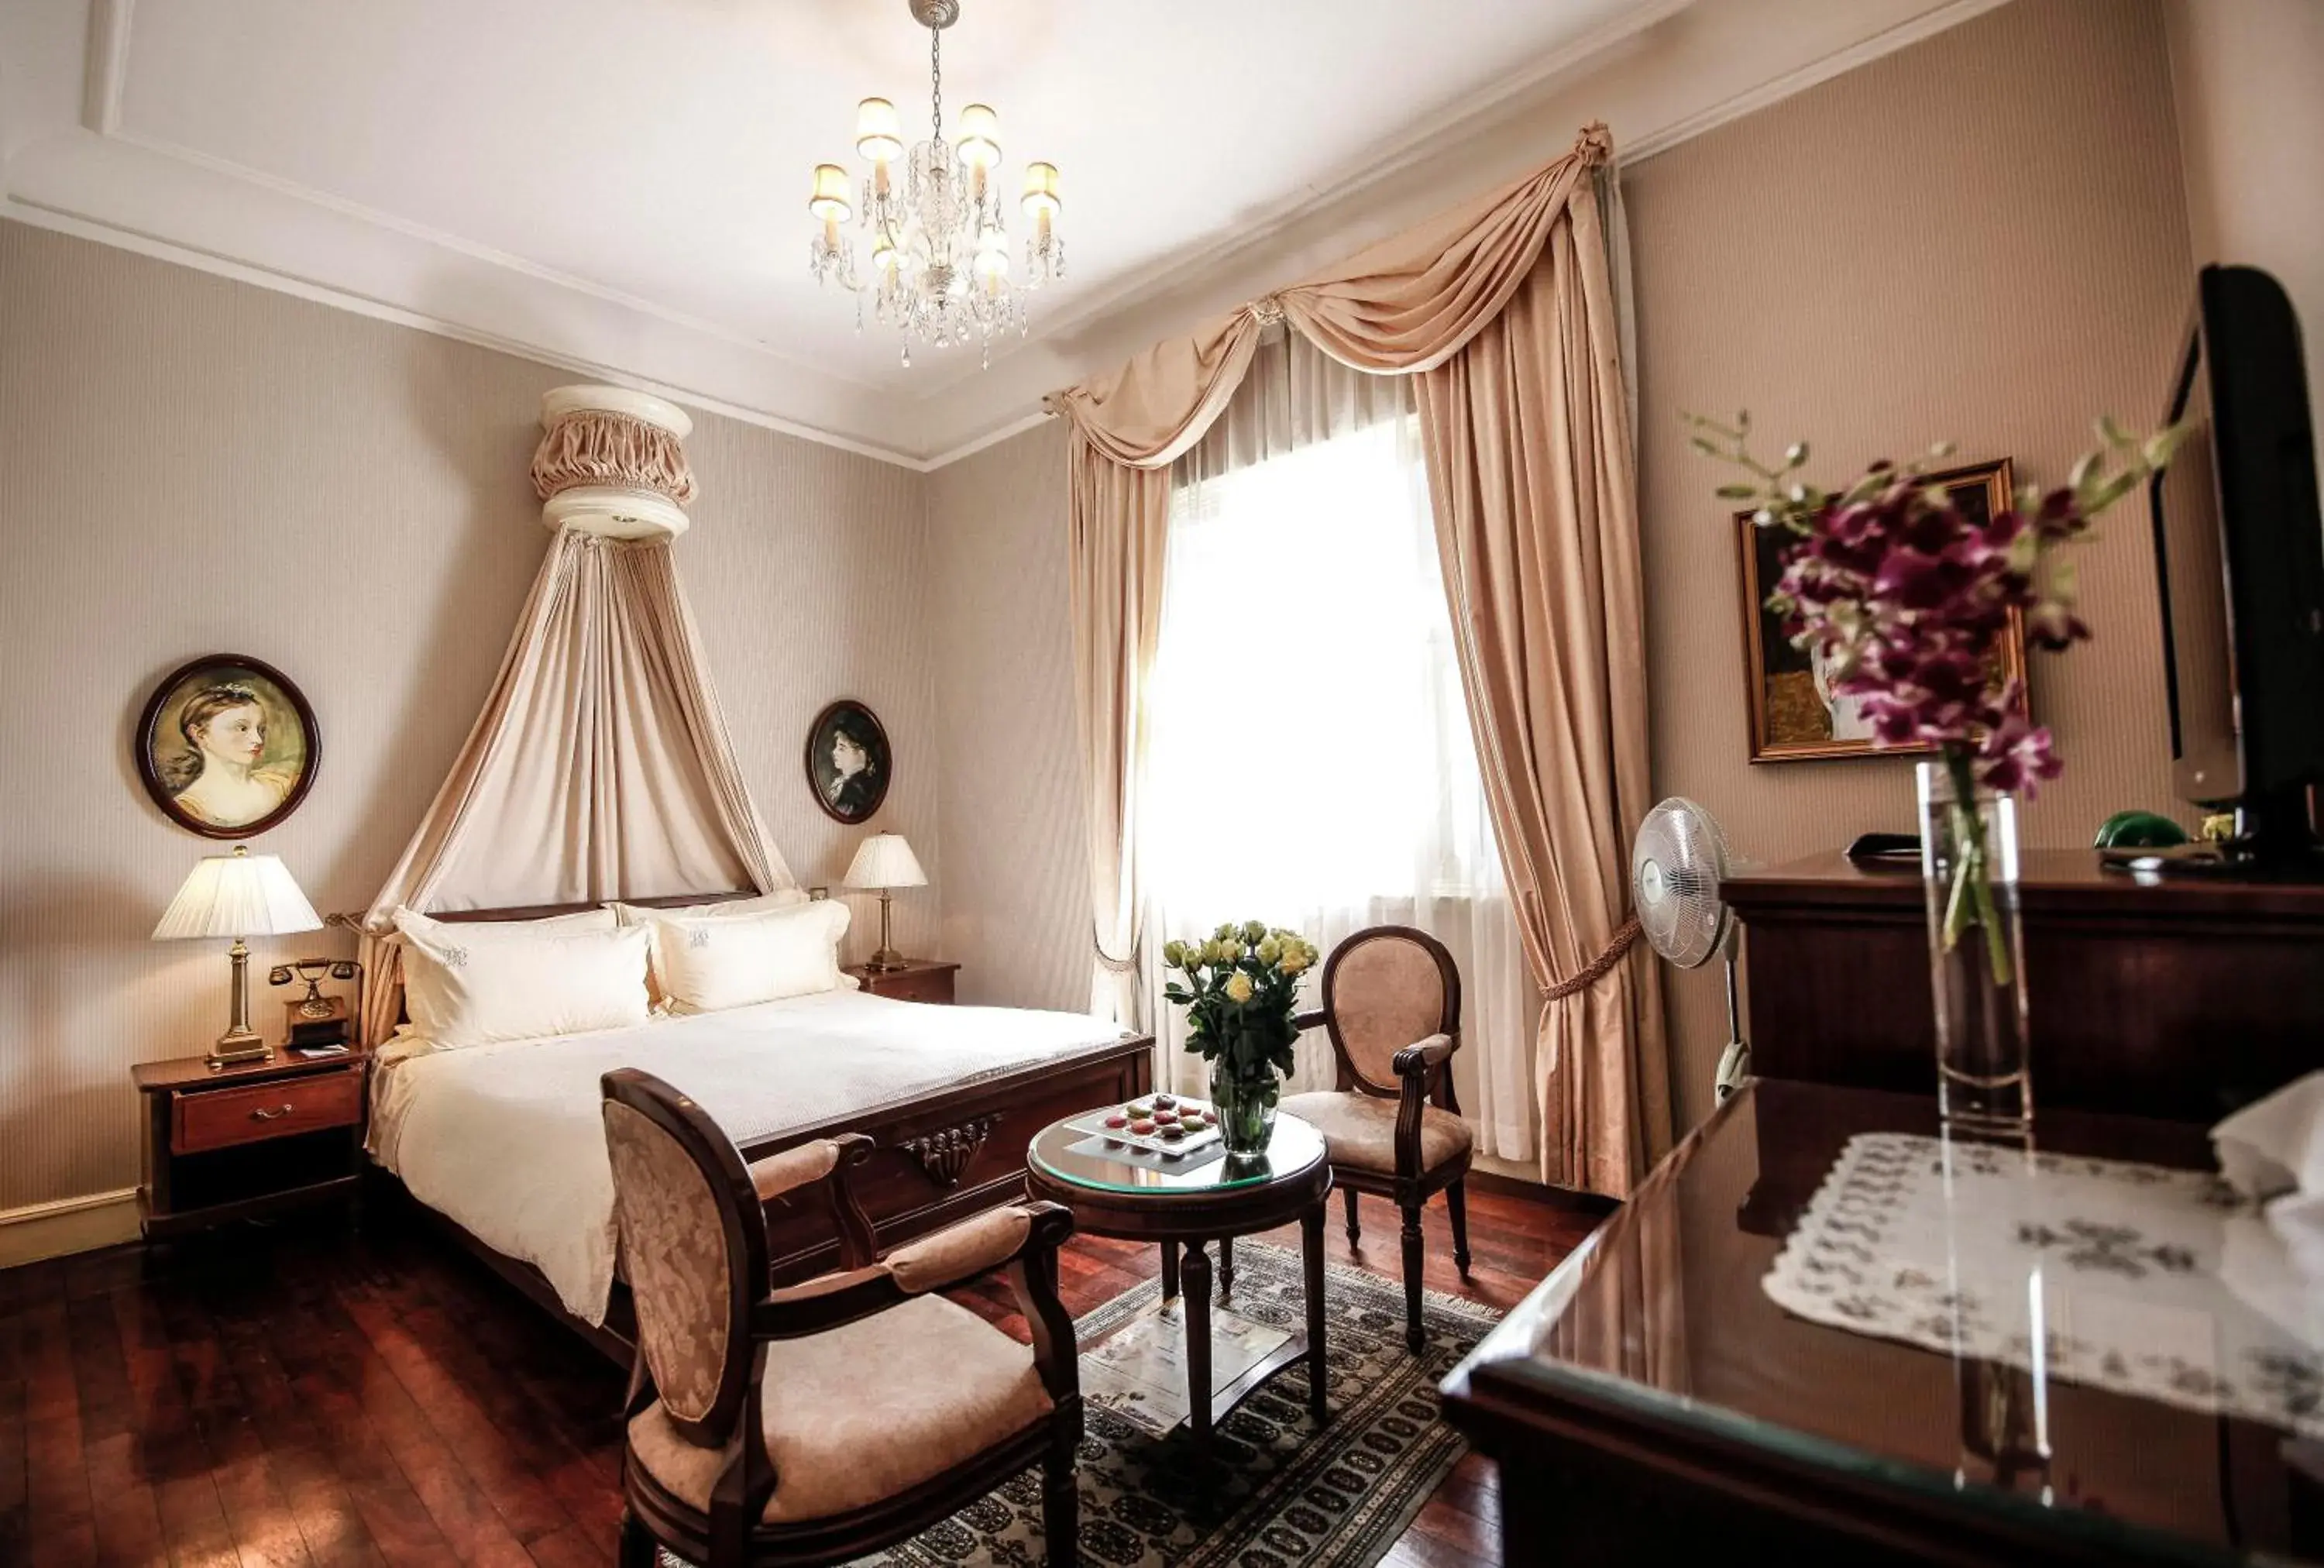 Superior Room - Exclusive Package in Dalat Palace Heritage Hotel